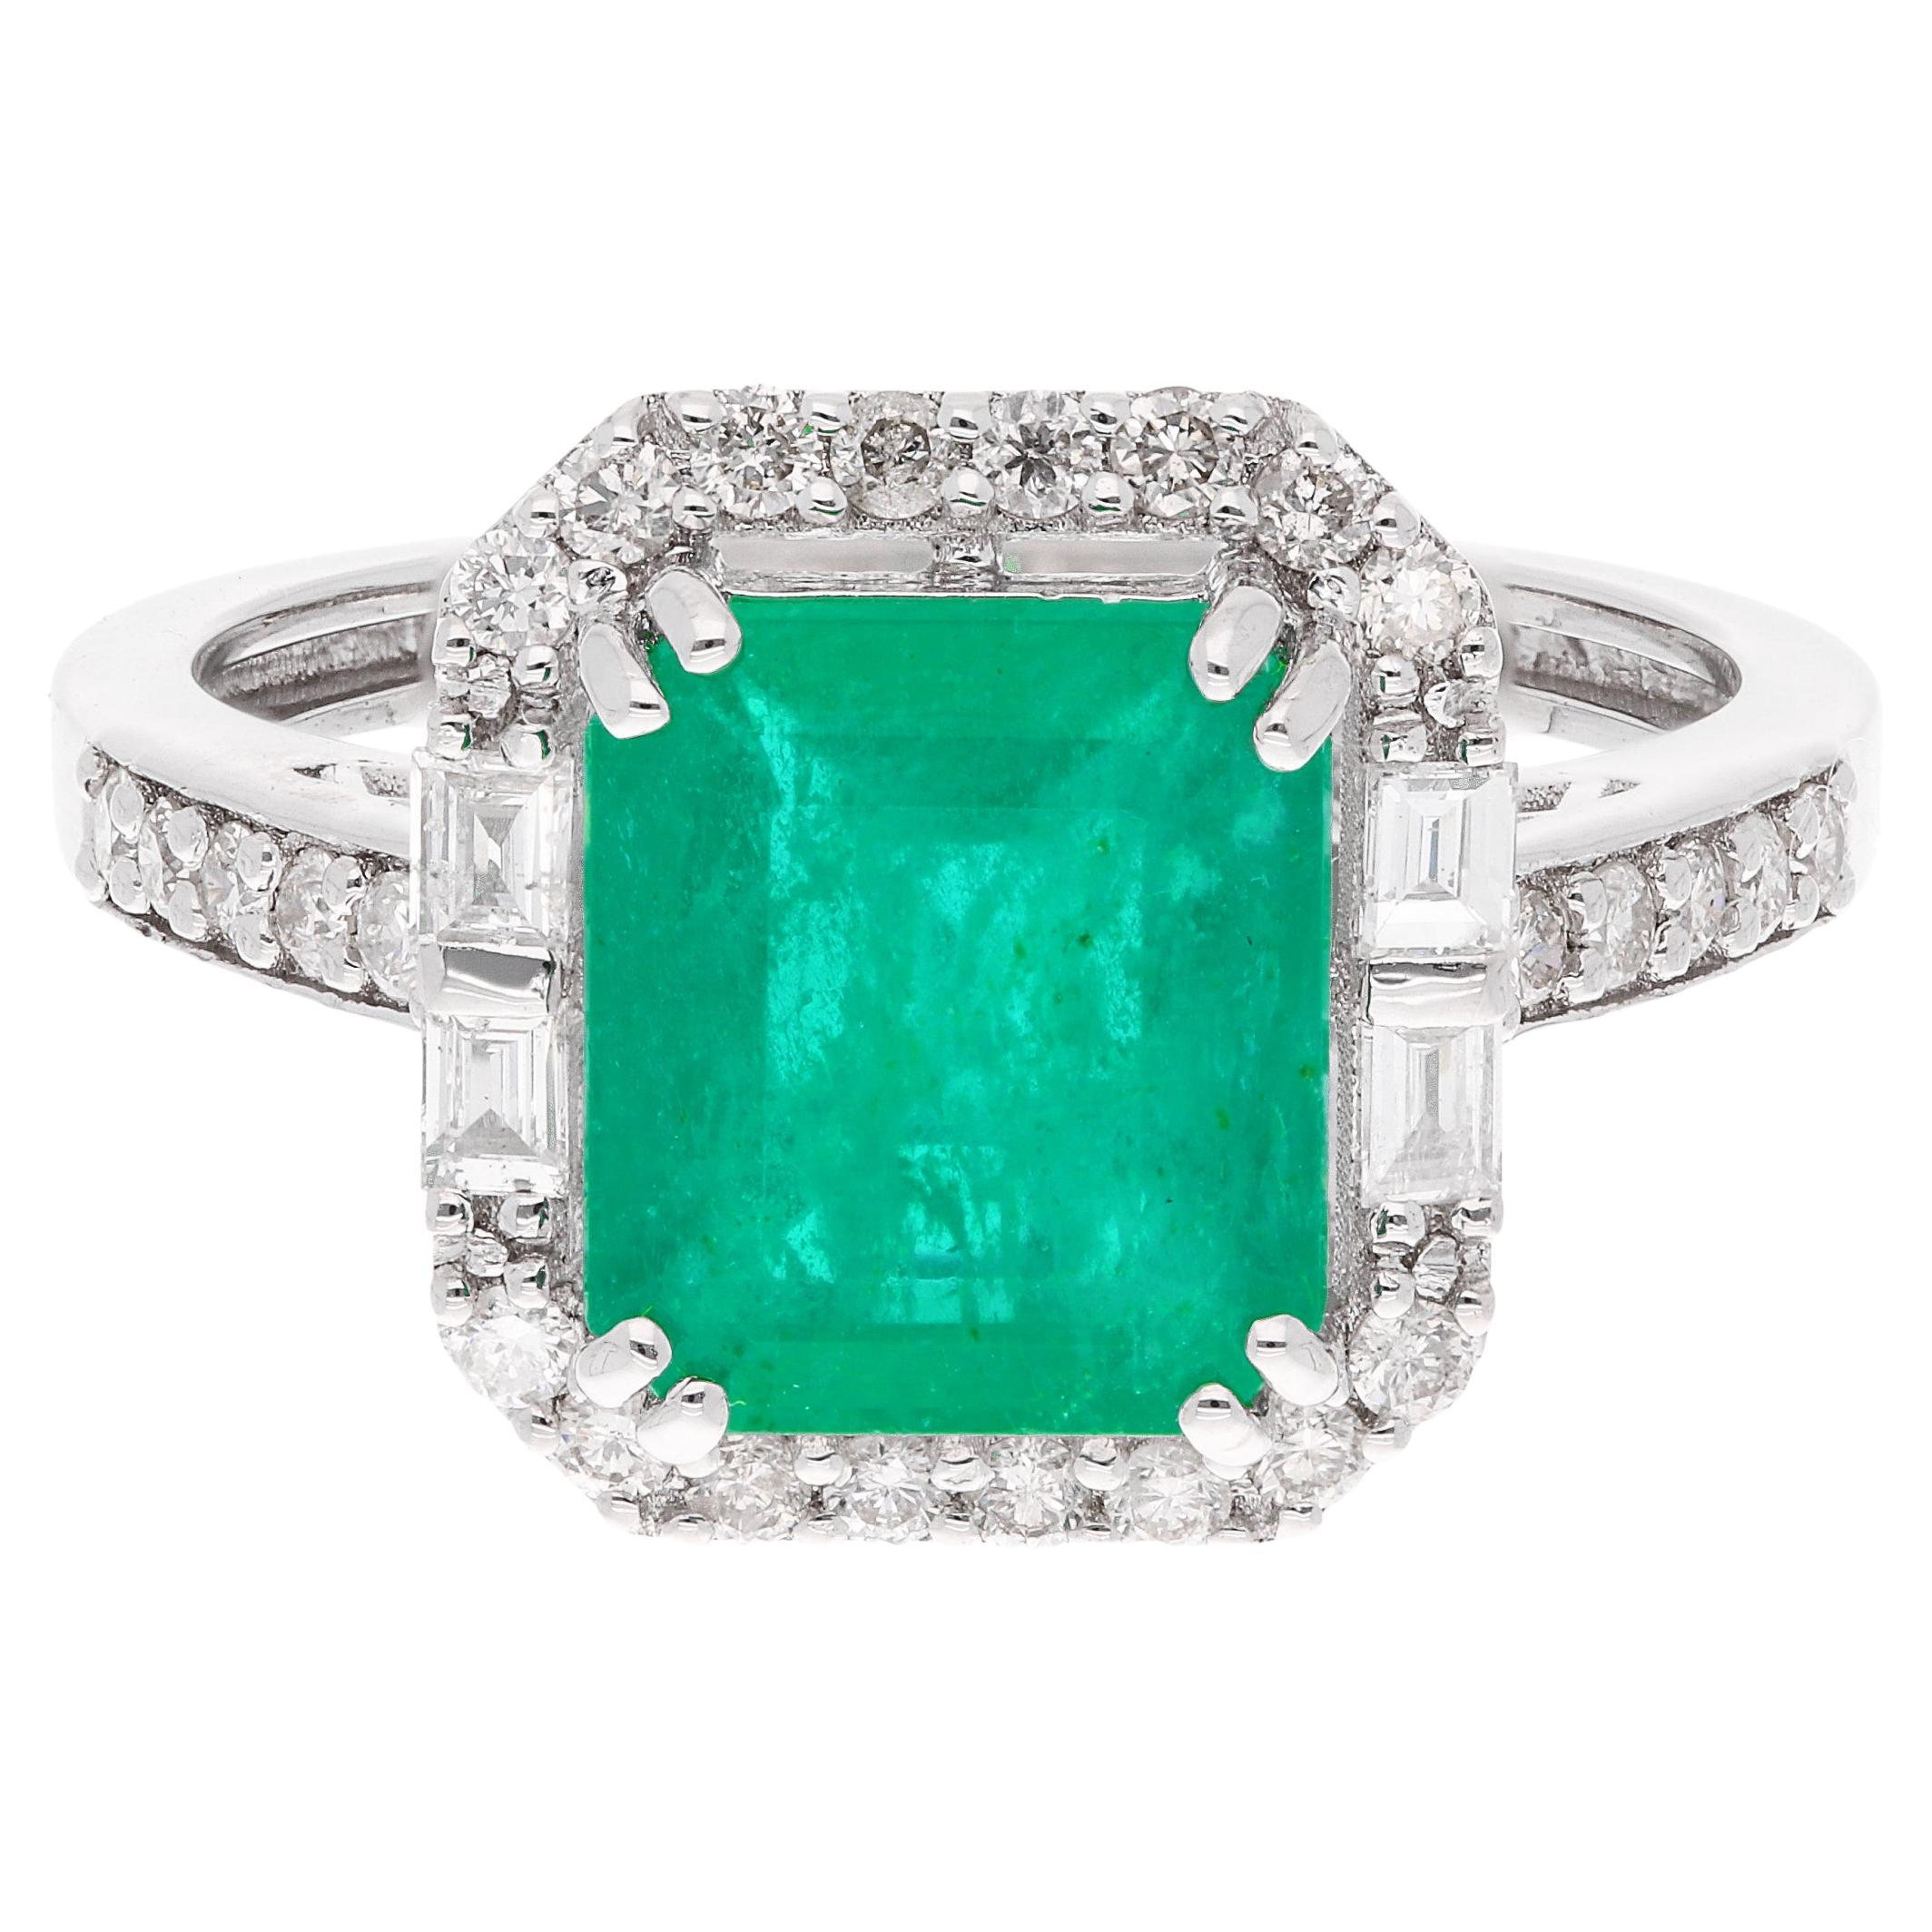 Natural Emerald Gemstone Cocktail Ring Baguette Diamond 14k White Gold Jewelry